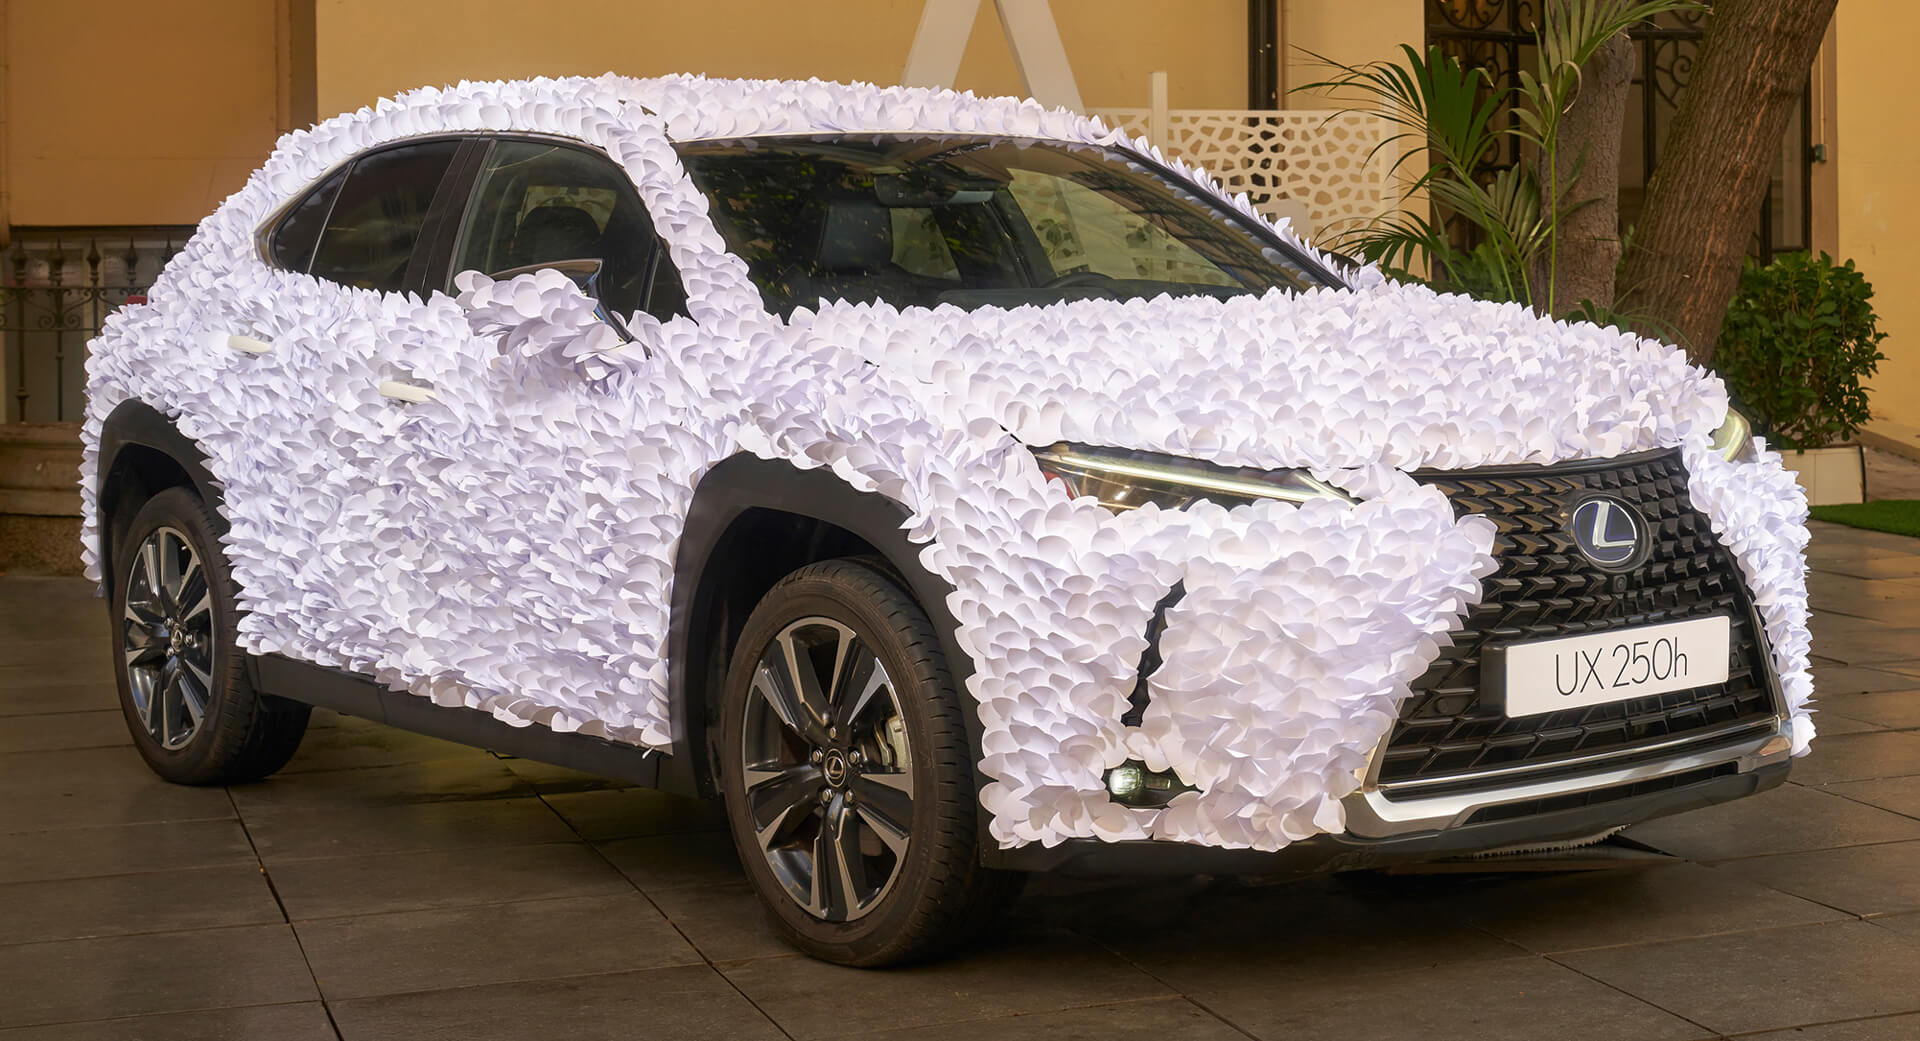 Don't Get Any Ideas, But Lexus UX Art Car Winner Is Covered In Thousands Of  Paper Petals